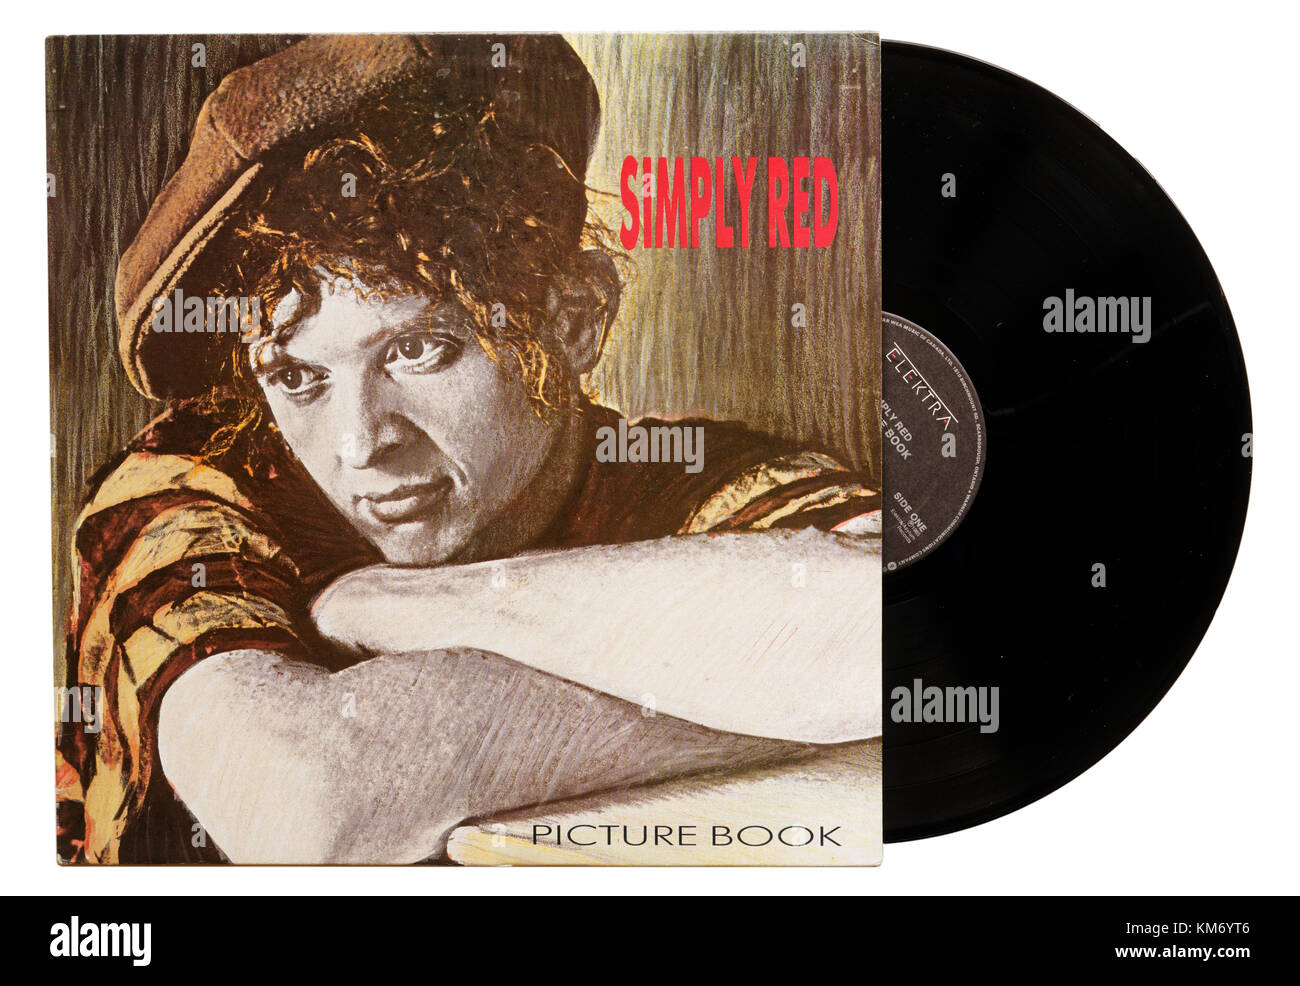 Simply Red Picture Book album Stockfoto